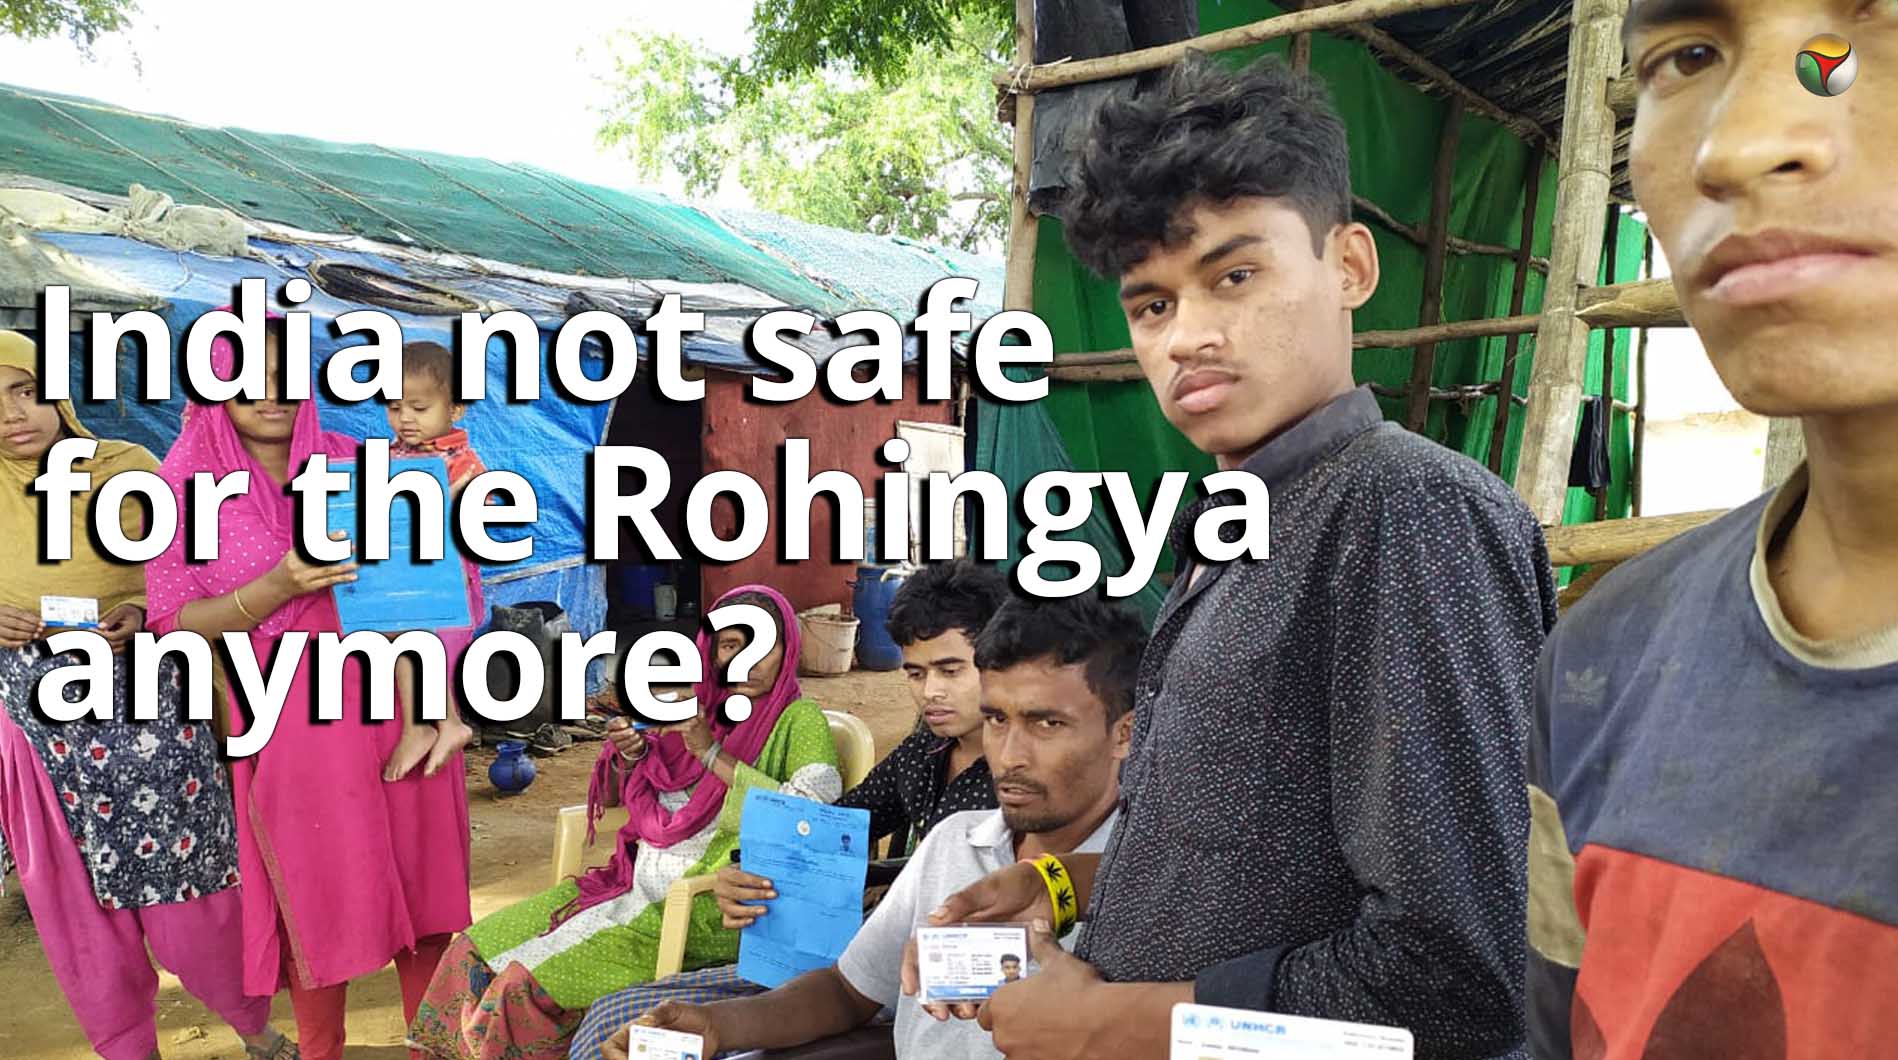 CAA: India not safe for the Rohingya anymore?